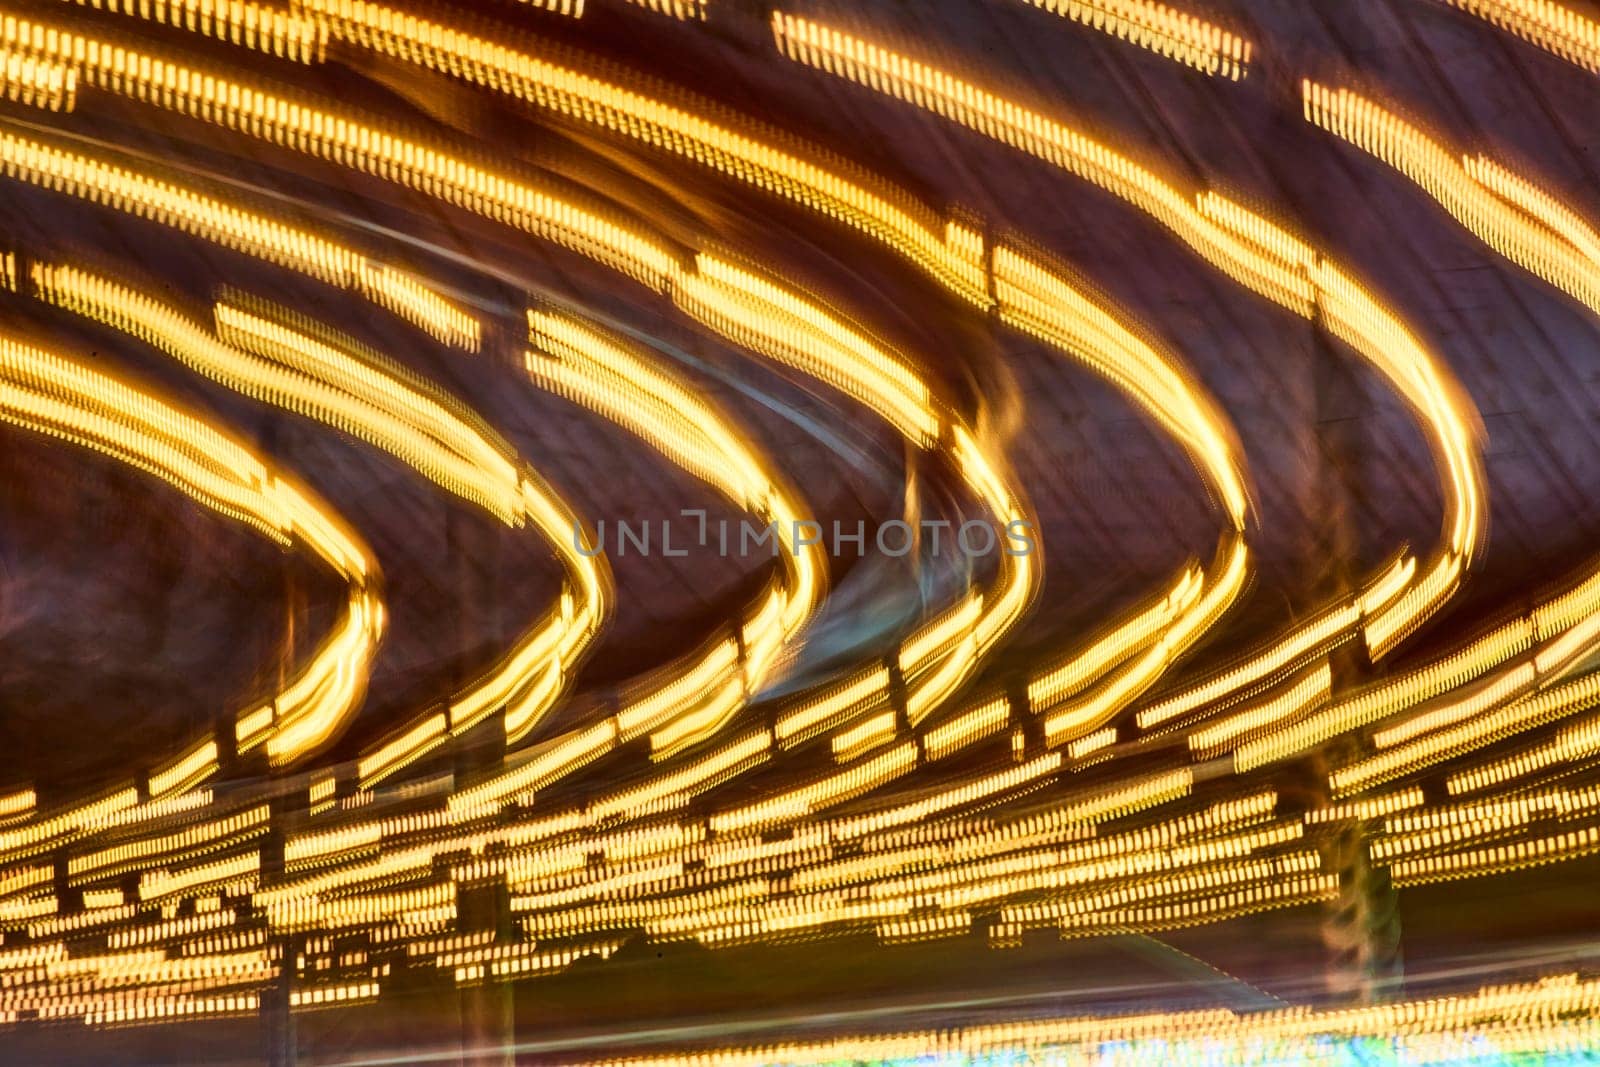 Golden light arcs sweep through the night at Fort Wayne Children's Zoo, capturing movement and energy.